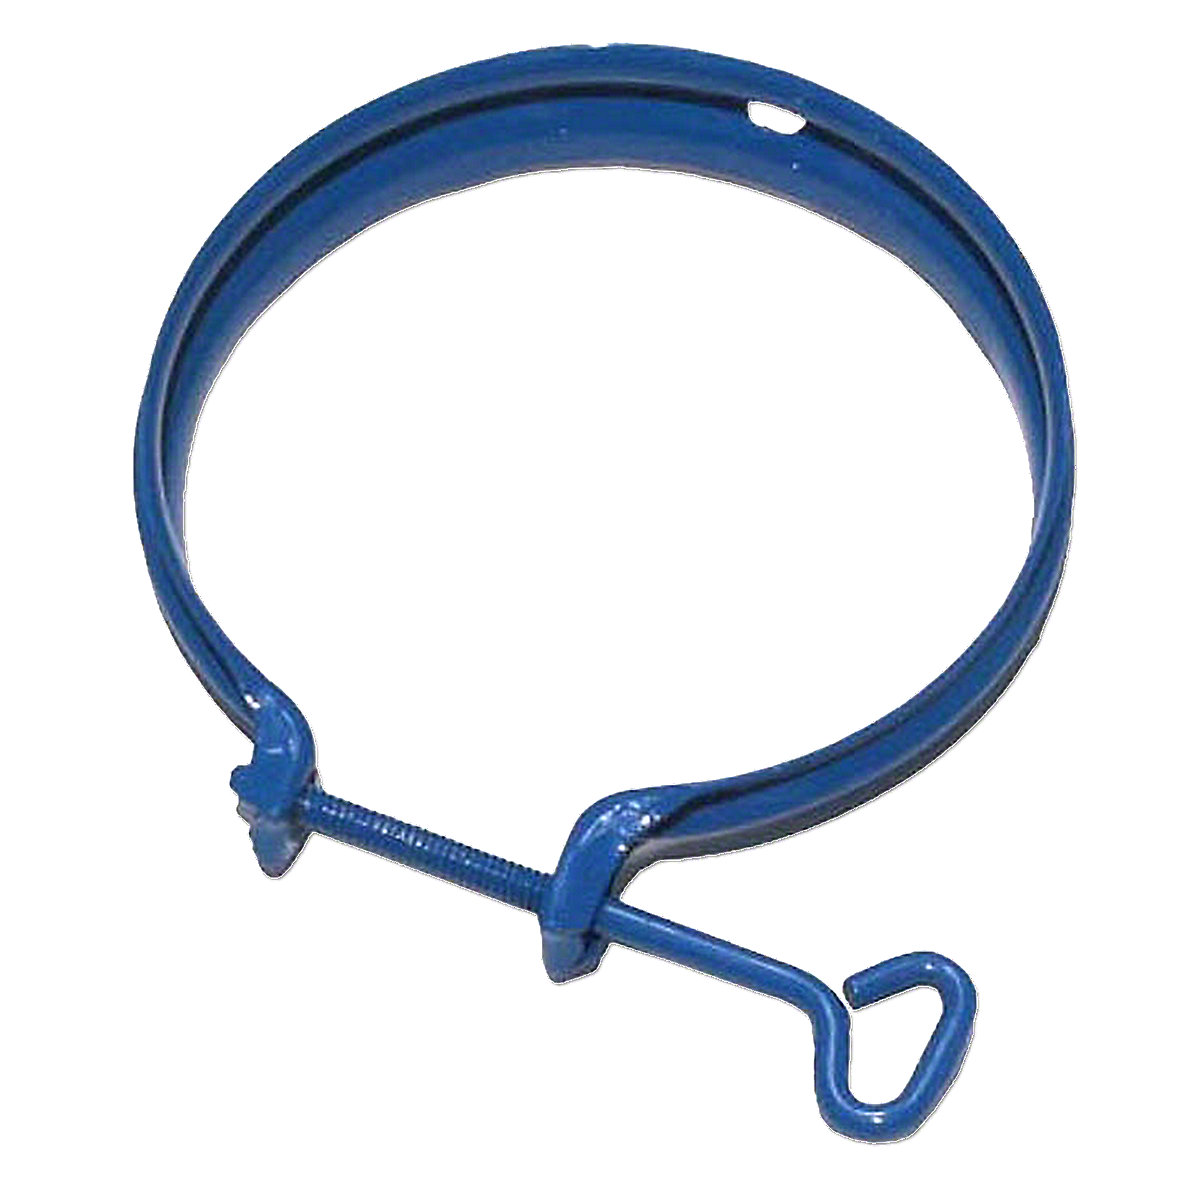 Air Cleaner Clamp For Oliver: Super 44 Gas, Super 55, 70 Row Crop SN#: 223151 and UP, 70 Standard SN#: 303437-303506, 77 Gas, 440, 550 UP to SN#: 72831, 660. ALL W/ DONALDSON AIR CLEANER